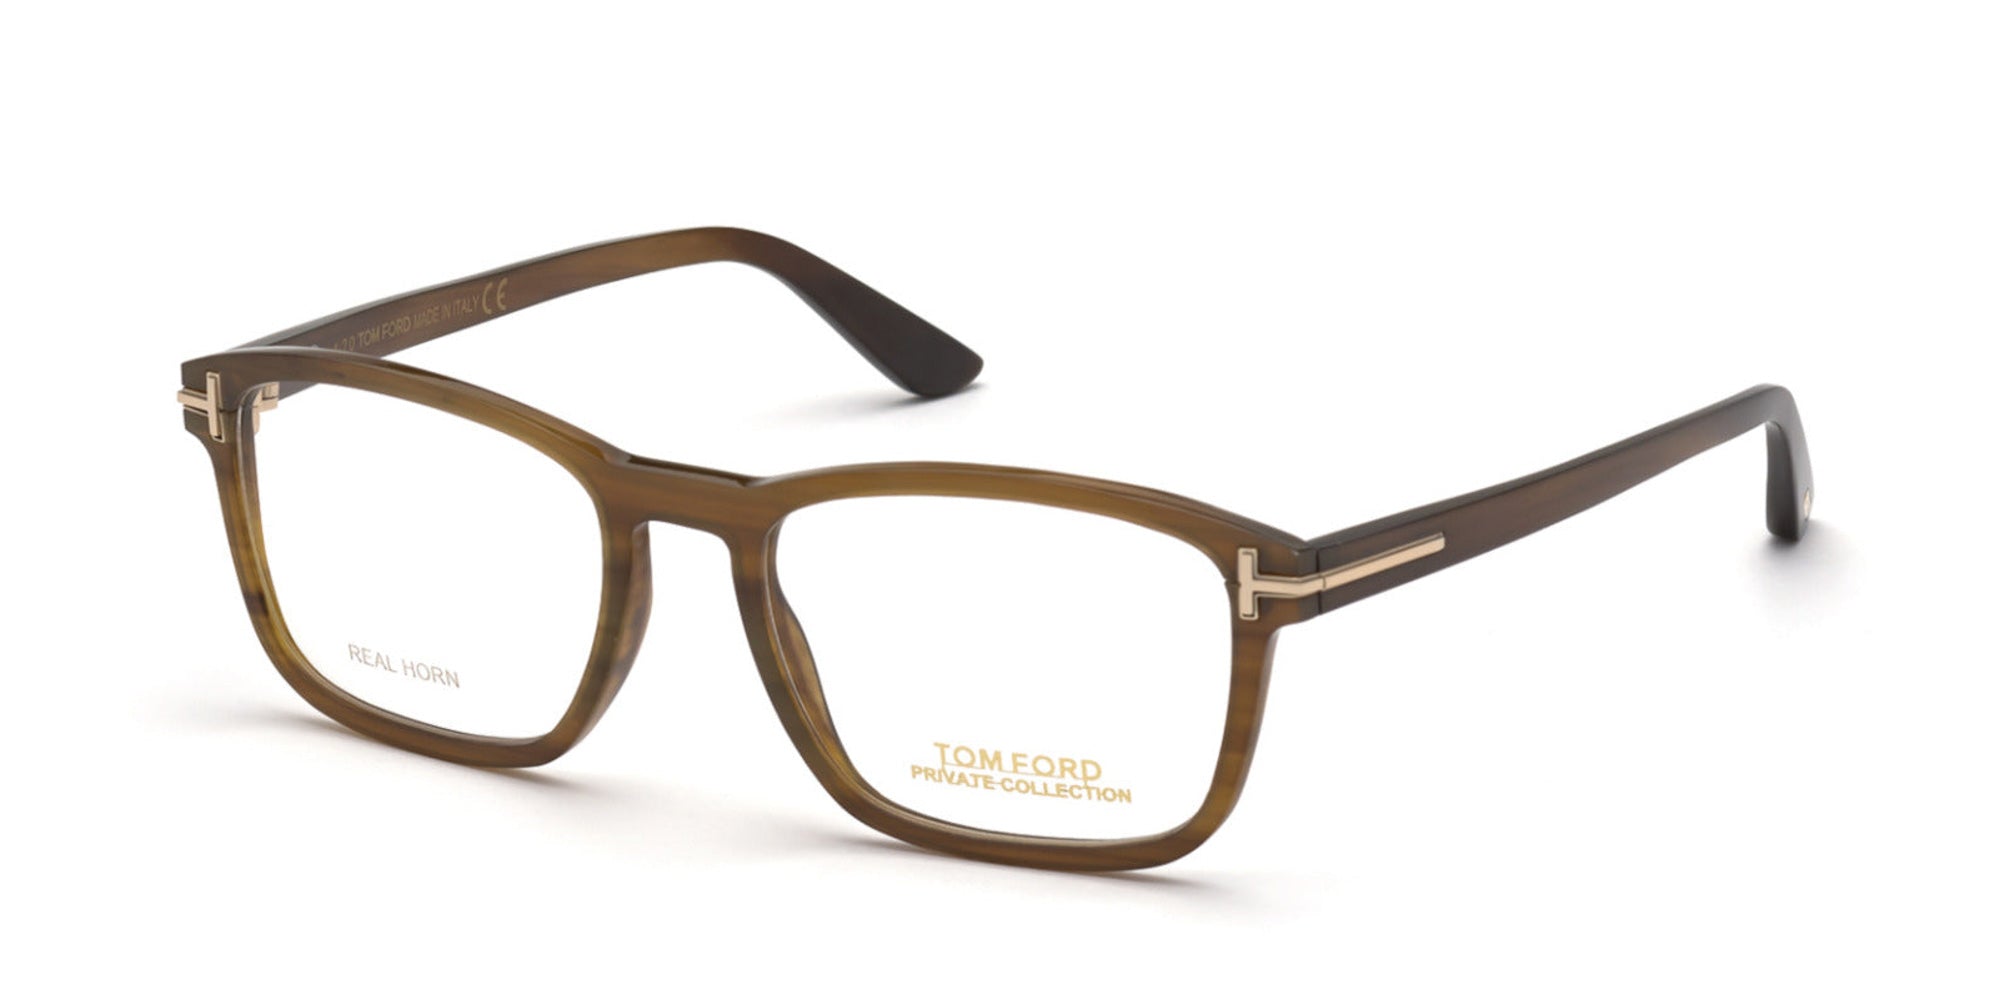 Tom Ford Private Collection TF5718-P Square Glasses | Eyewear